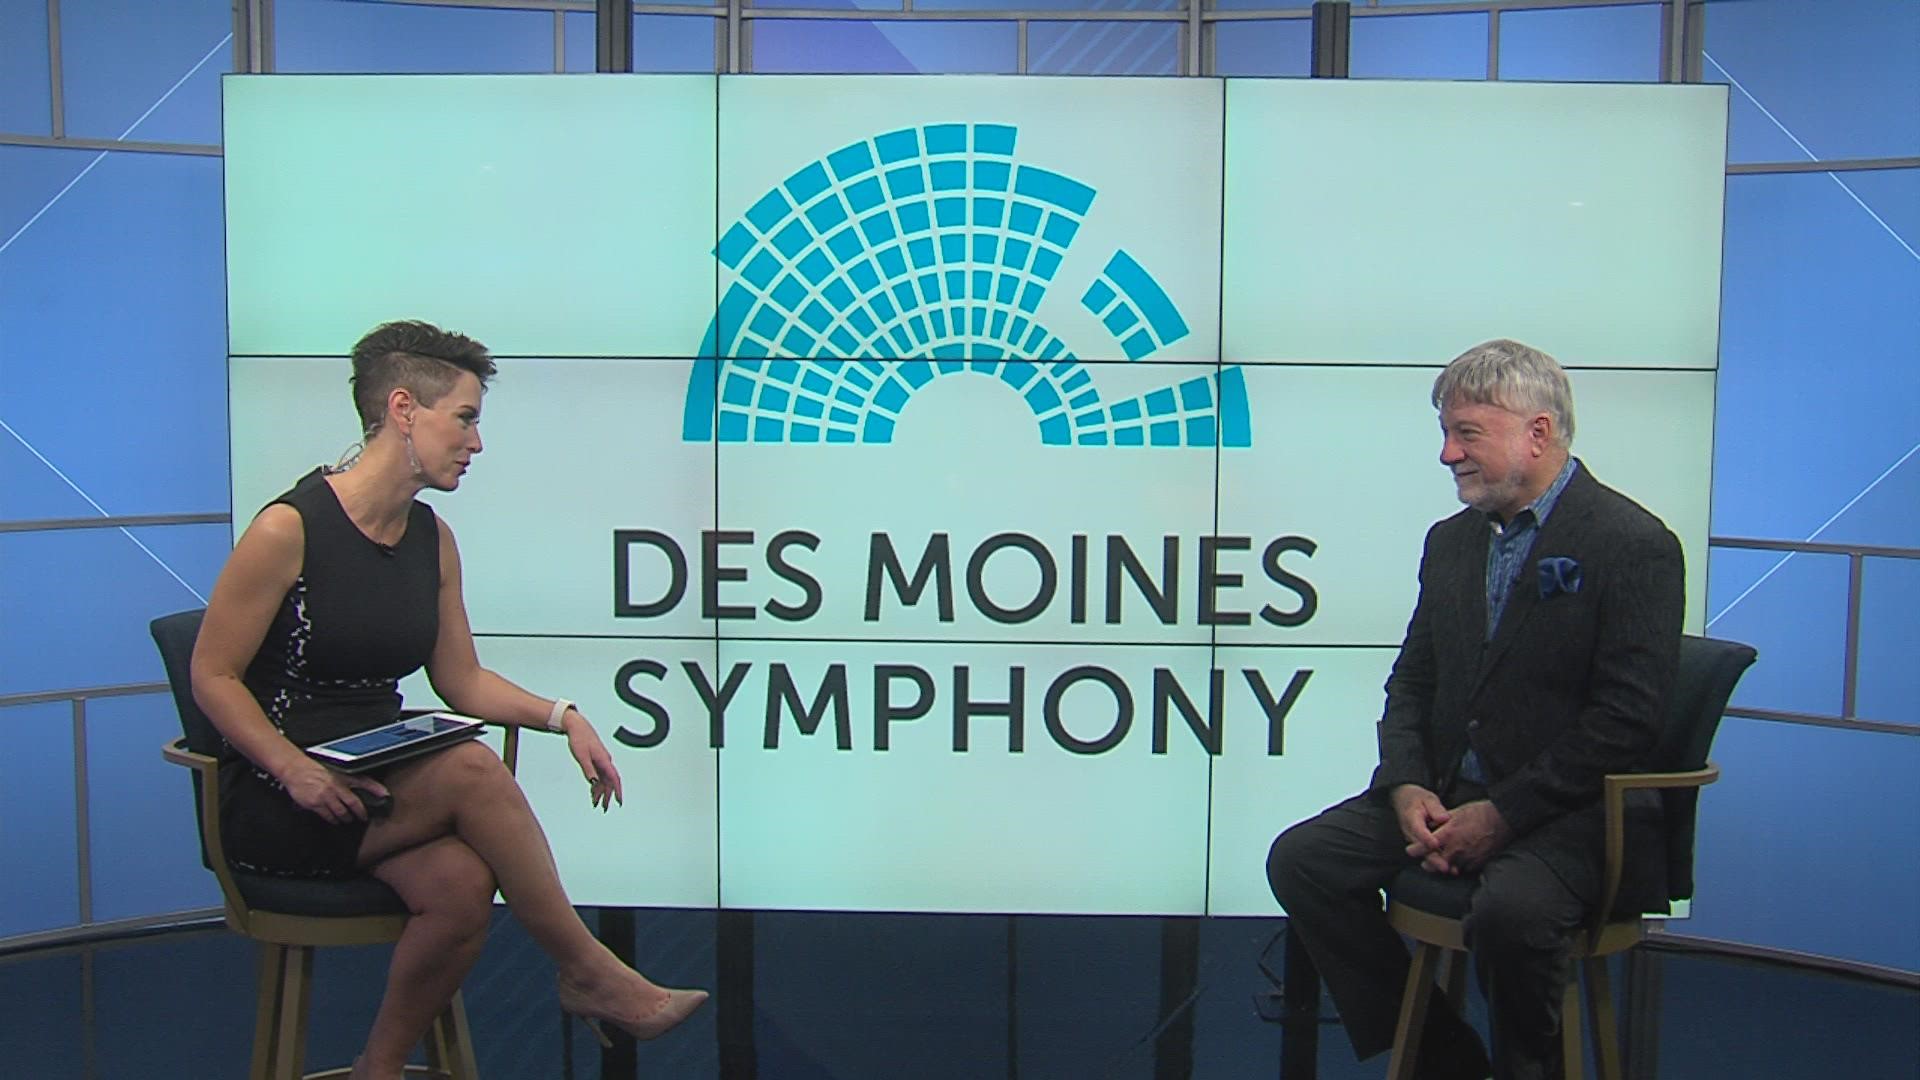 Maestro for the Des Moines Symphony Joseph Giunta joins Local 5 to discuss what people can look forward to this season.